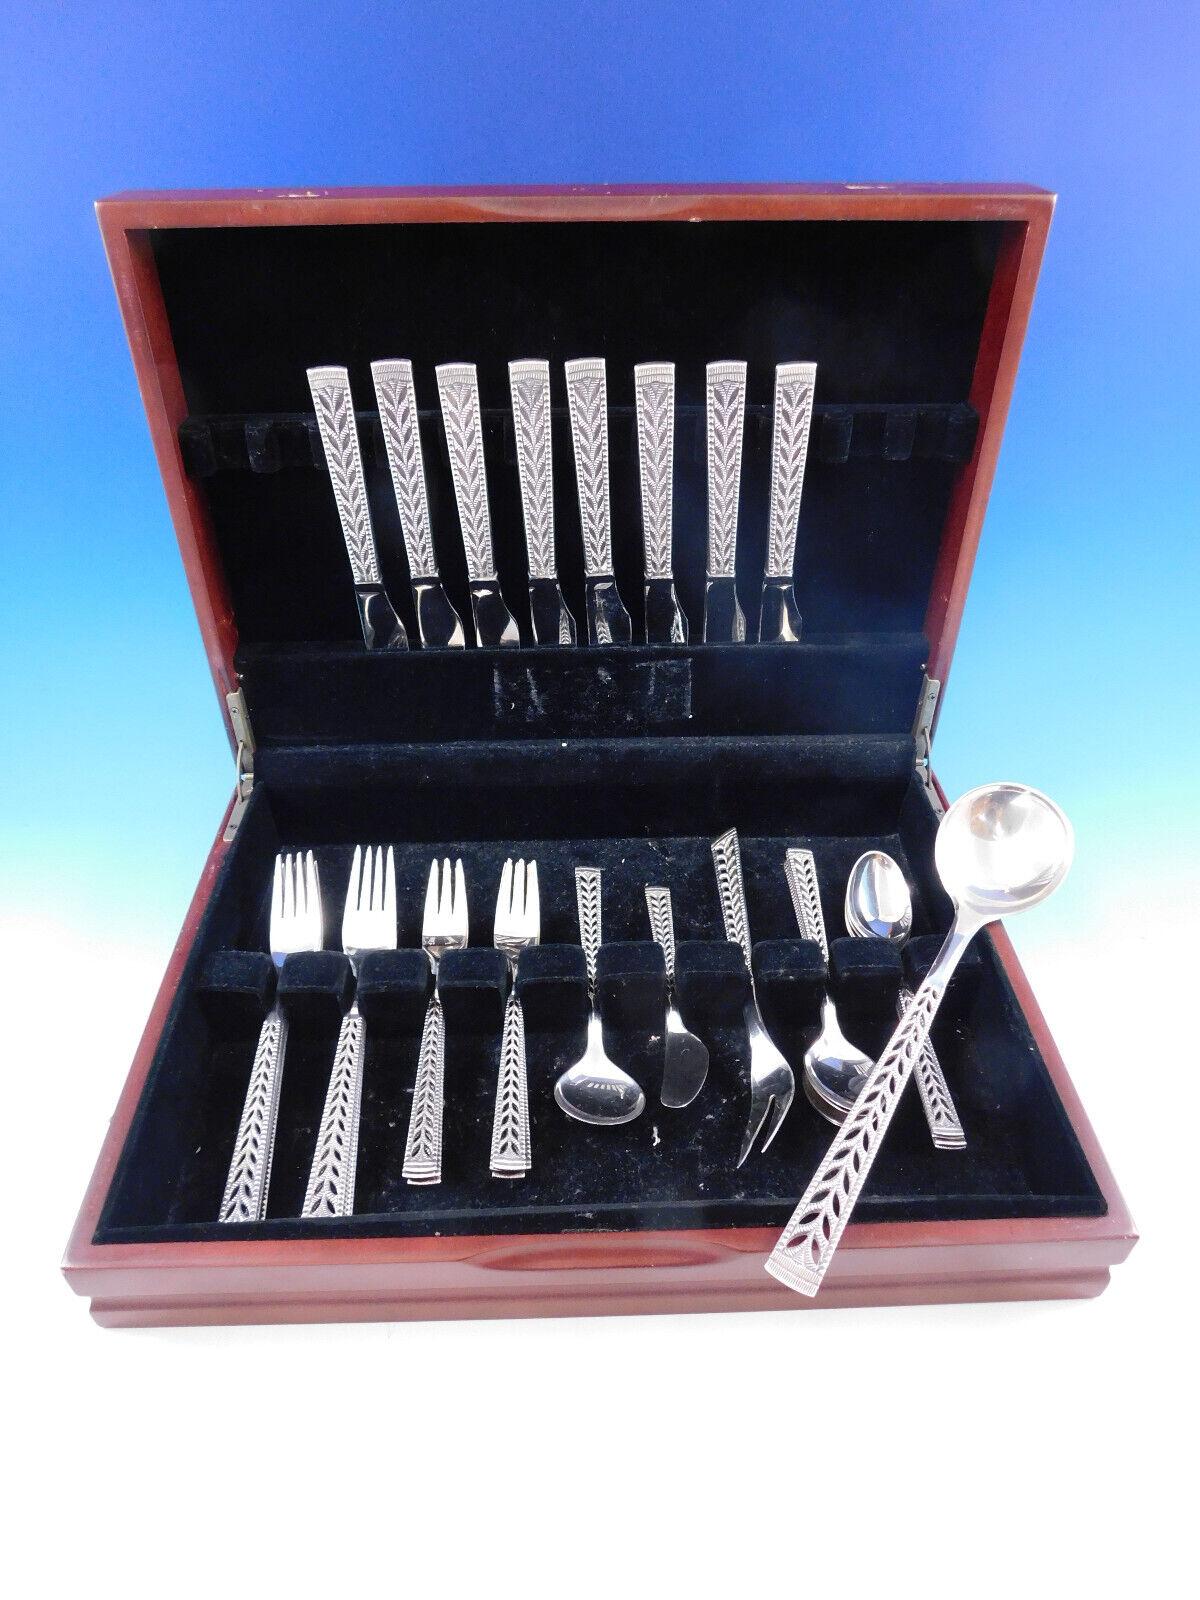 Juvel by Nils Hansen Norway Norwegian 830 silver Flatware set, circa 1965, with unique pierced handle - 36 pieces. This set includes:

8 Knives, 8